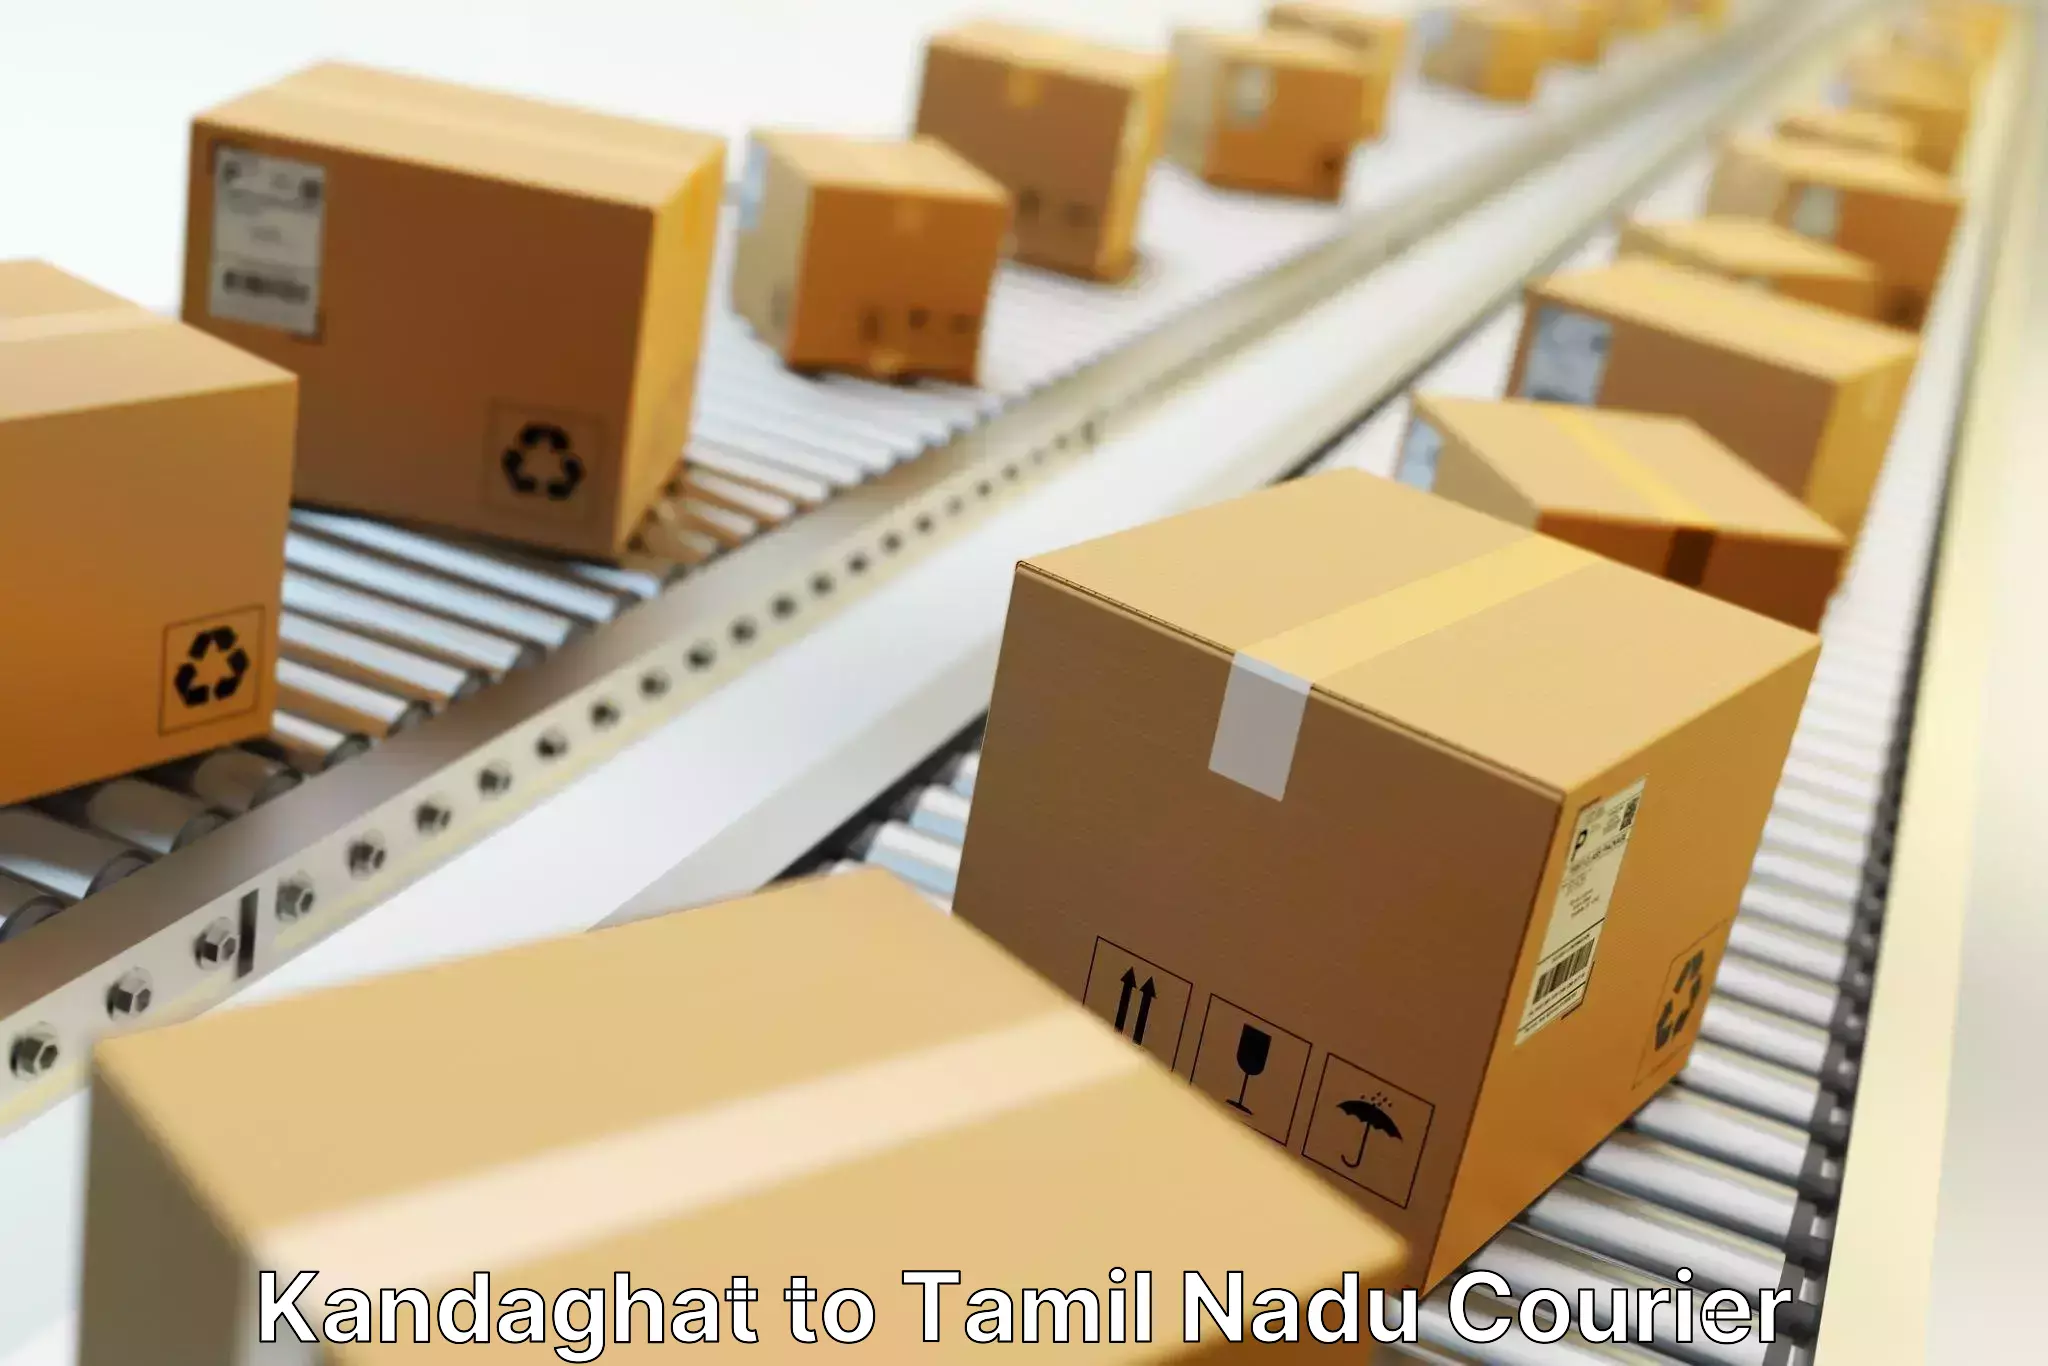 Speedy delivery service Kandaghat to Tuticorin Port